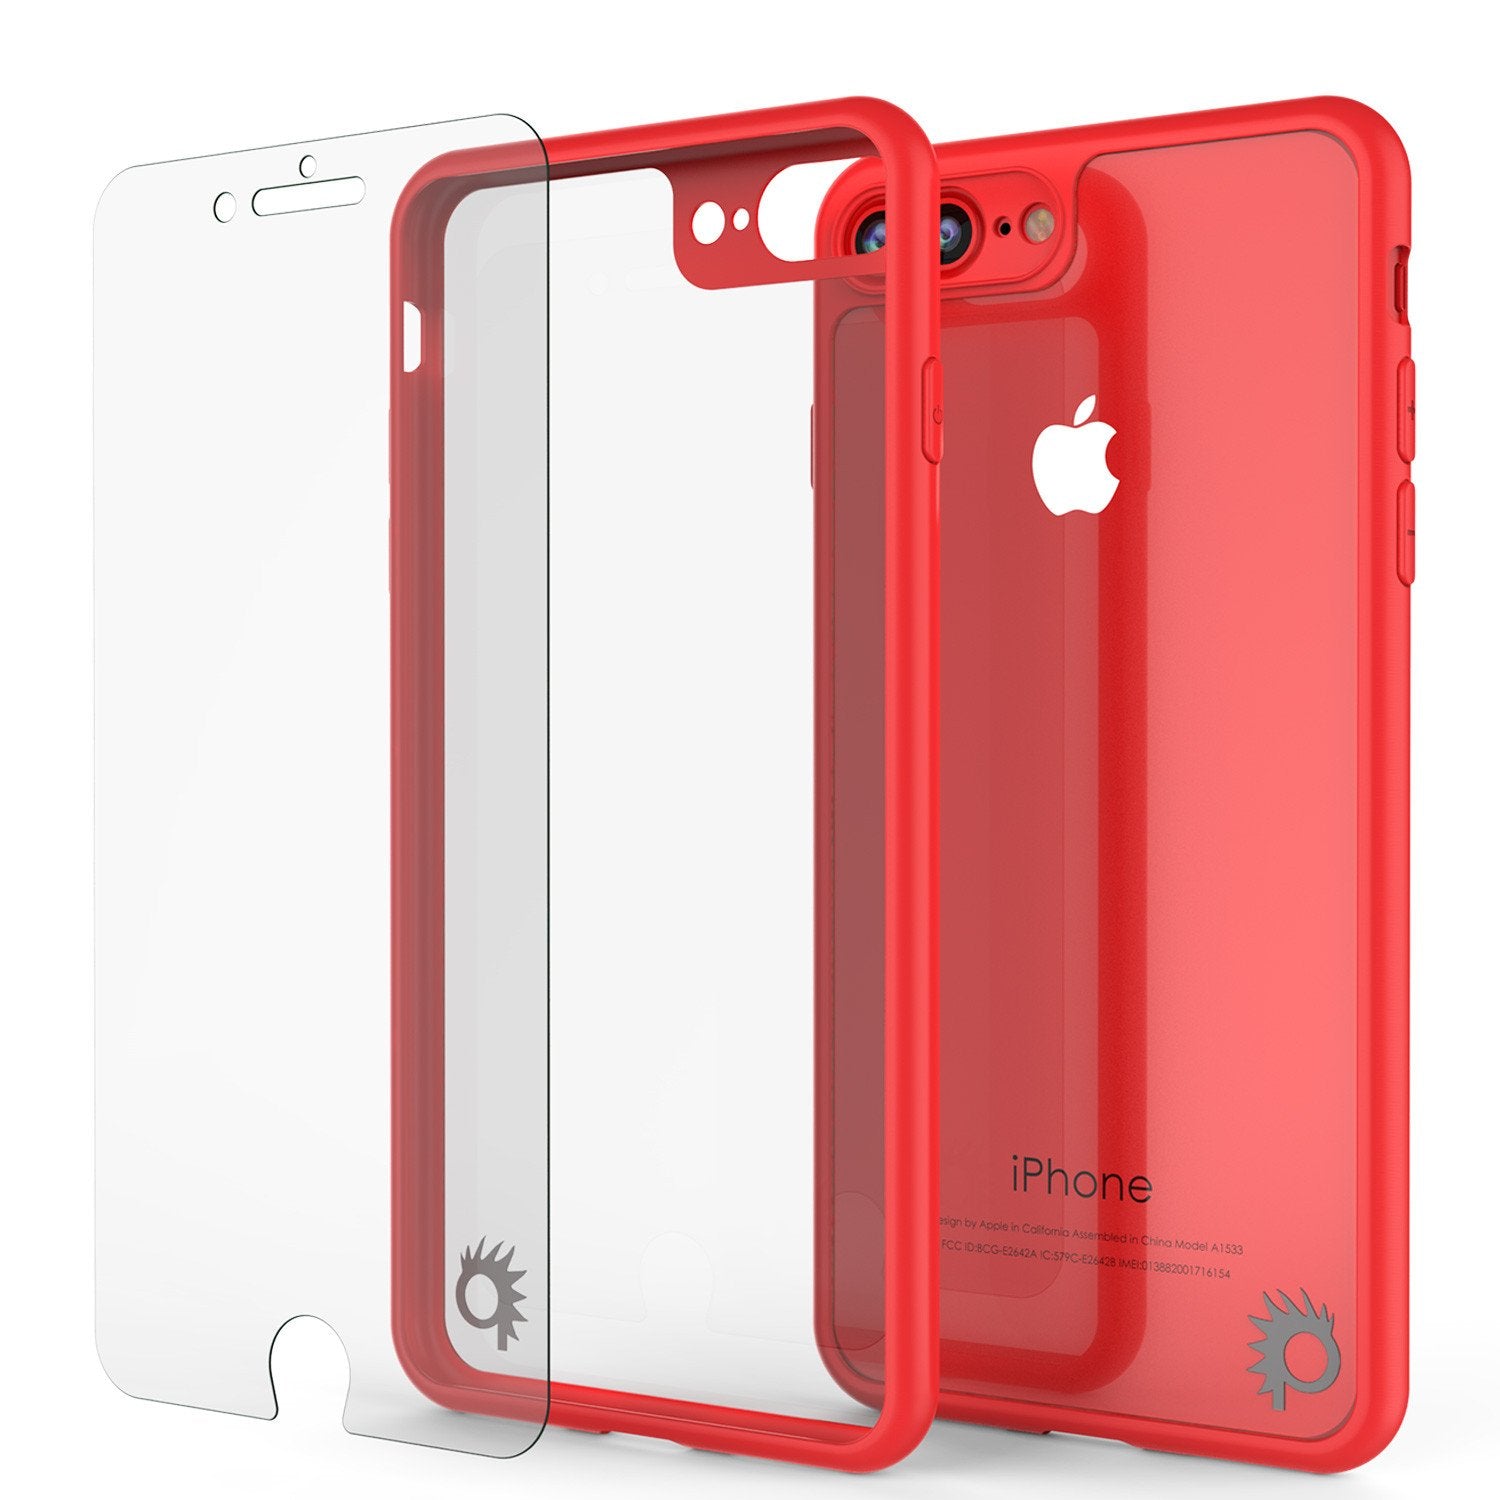 iPhone 7+ Plus Case [MASK Series] [RED] Full Body Hybrid Dual Layer TPU Cover W/ protective Tempered Glass Screen Protector - PunkCase NZ